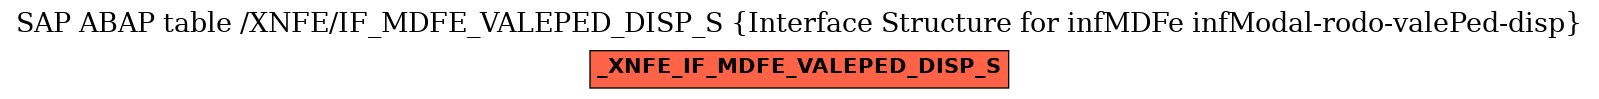 E-R Diagram for table /XNFE/IF_MDFE_VALEPED_DISP_S (Interface Structure for infMDFe infModal-rodo-valePed-disp)